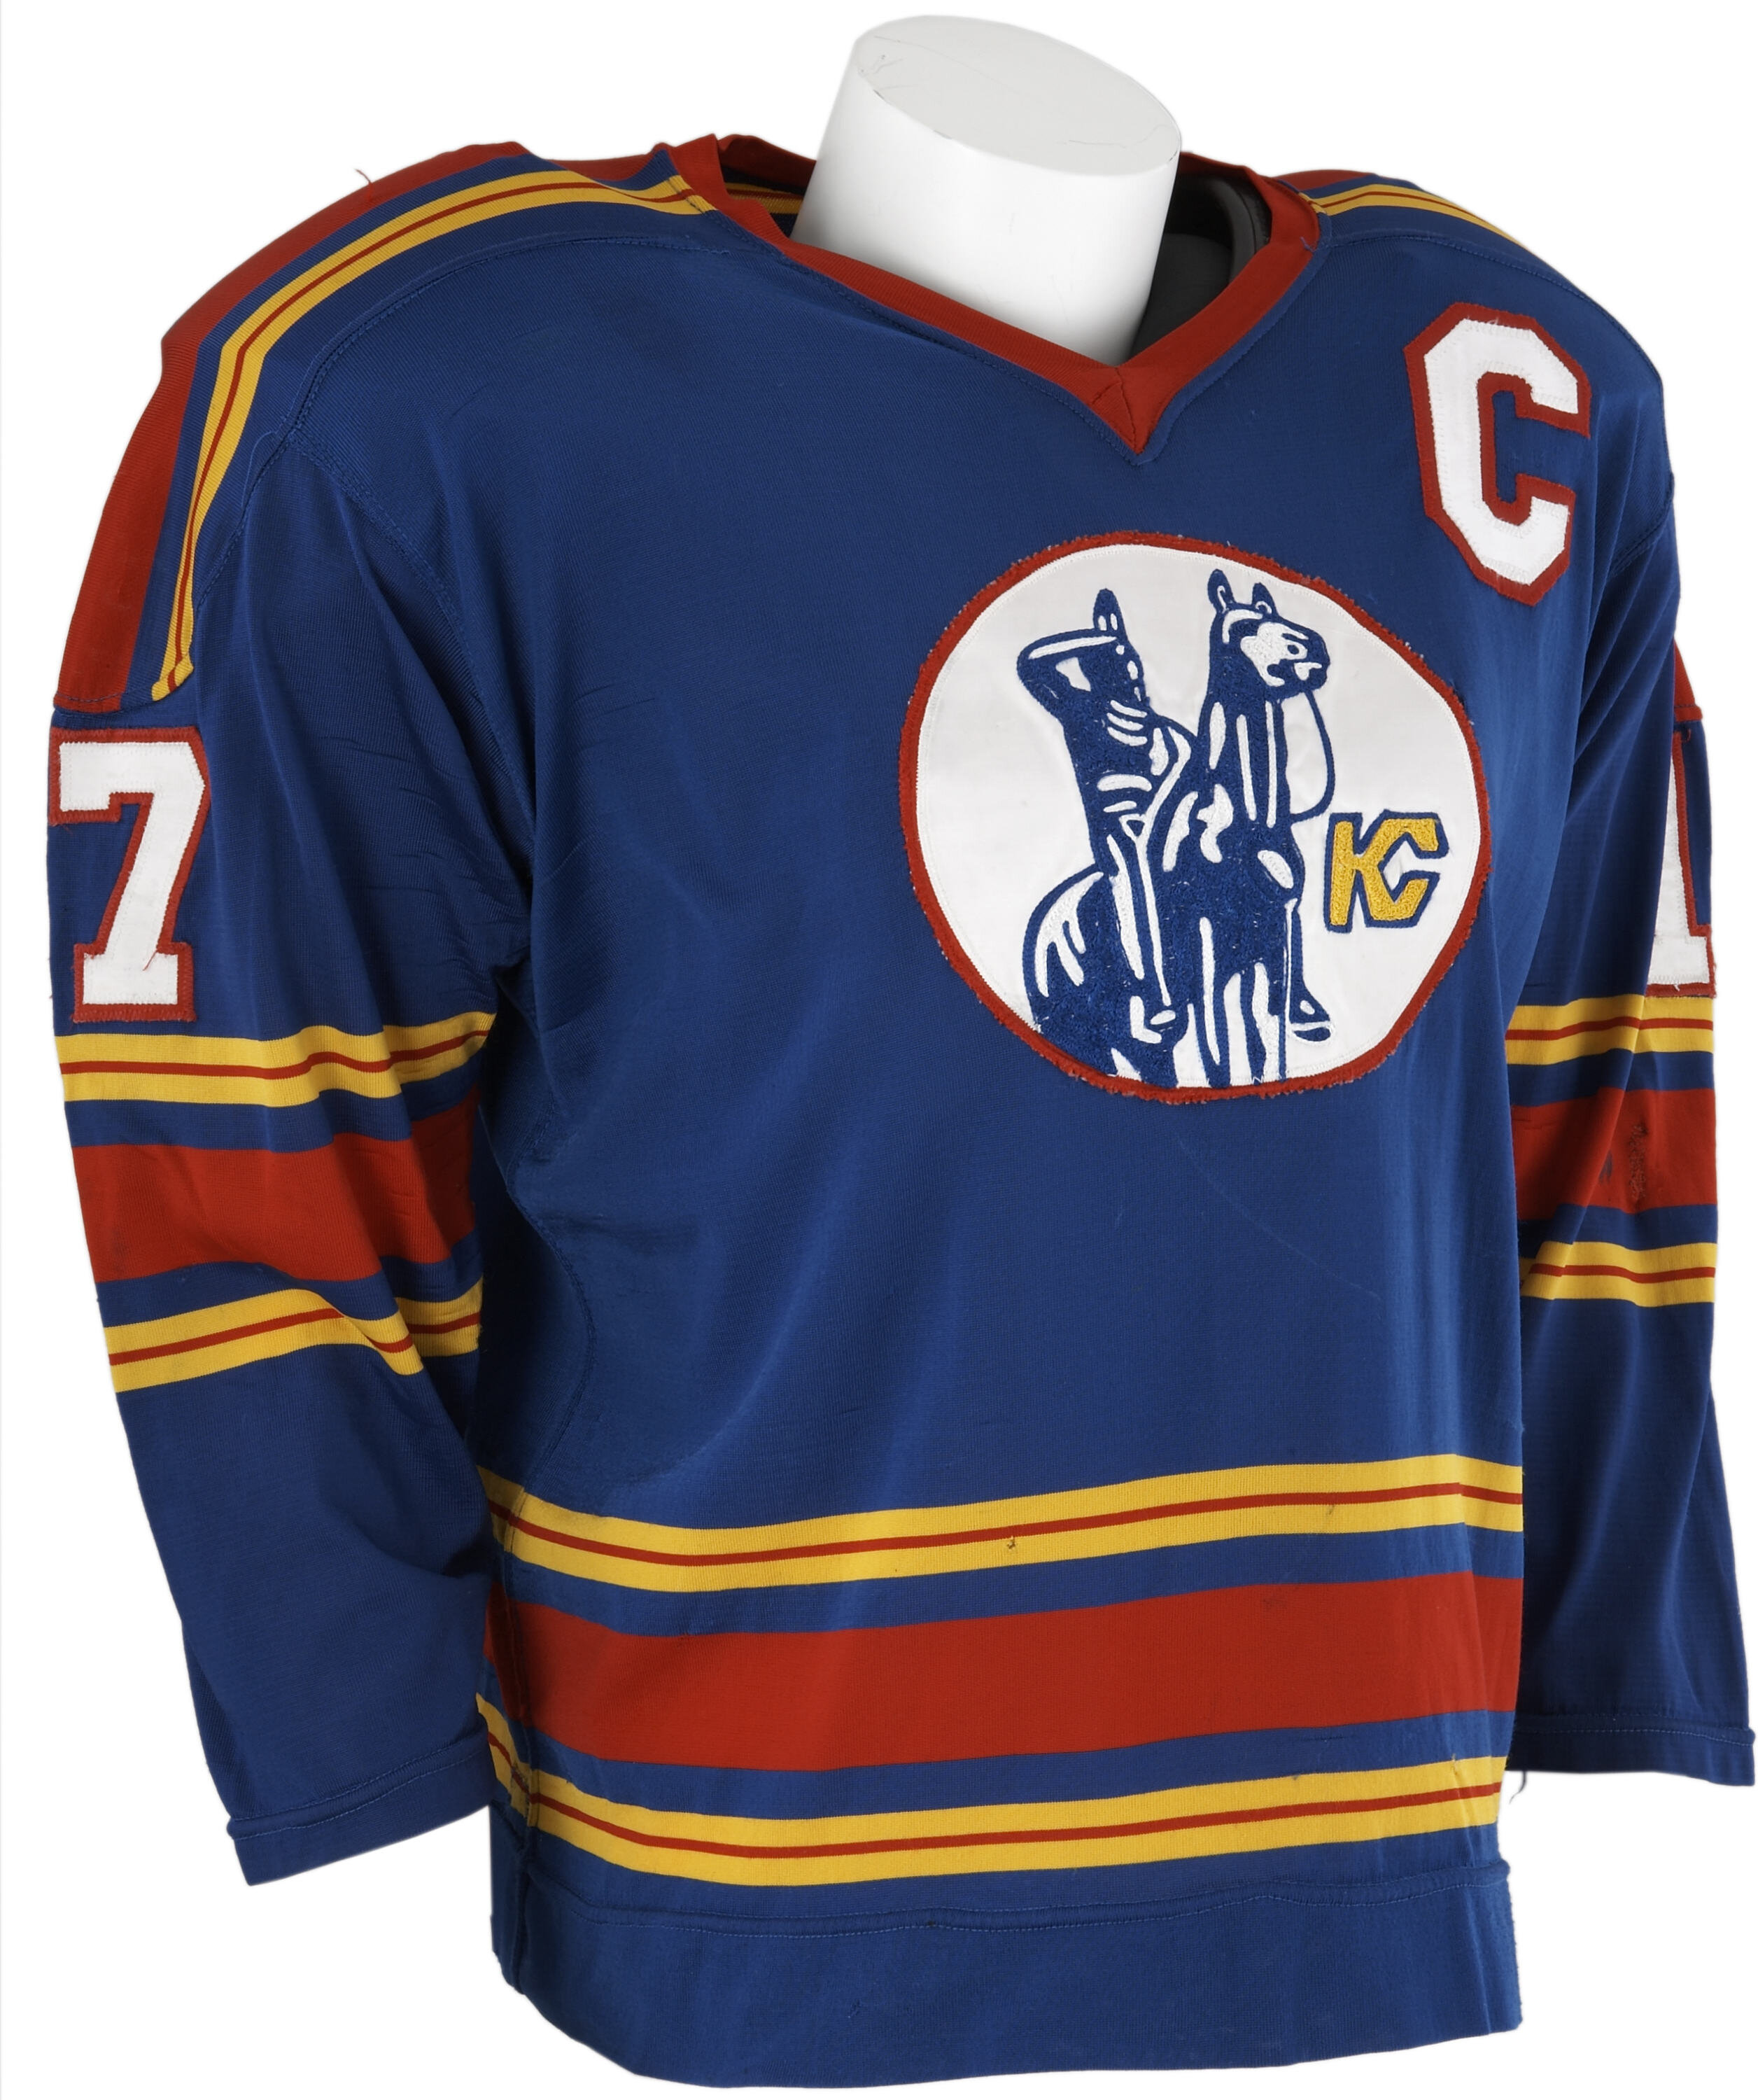 Simon Nolet Kansas City Scouts 1974 Game Used Jersey - Game Used Only